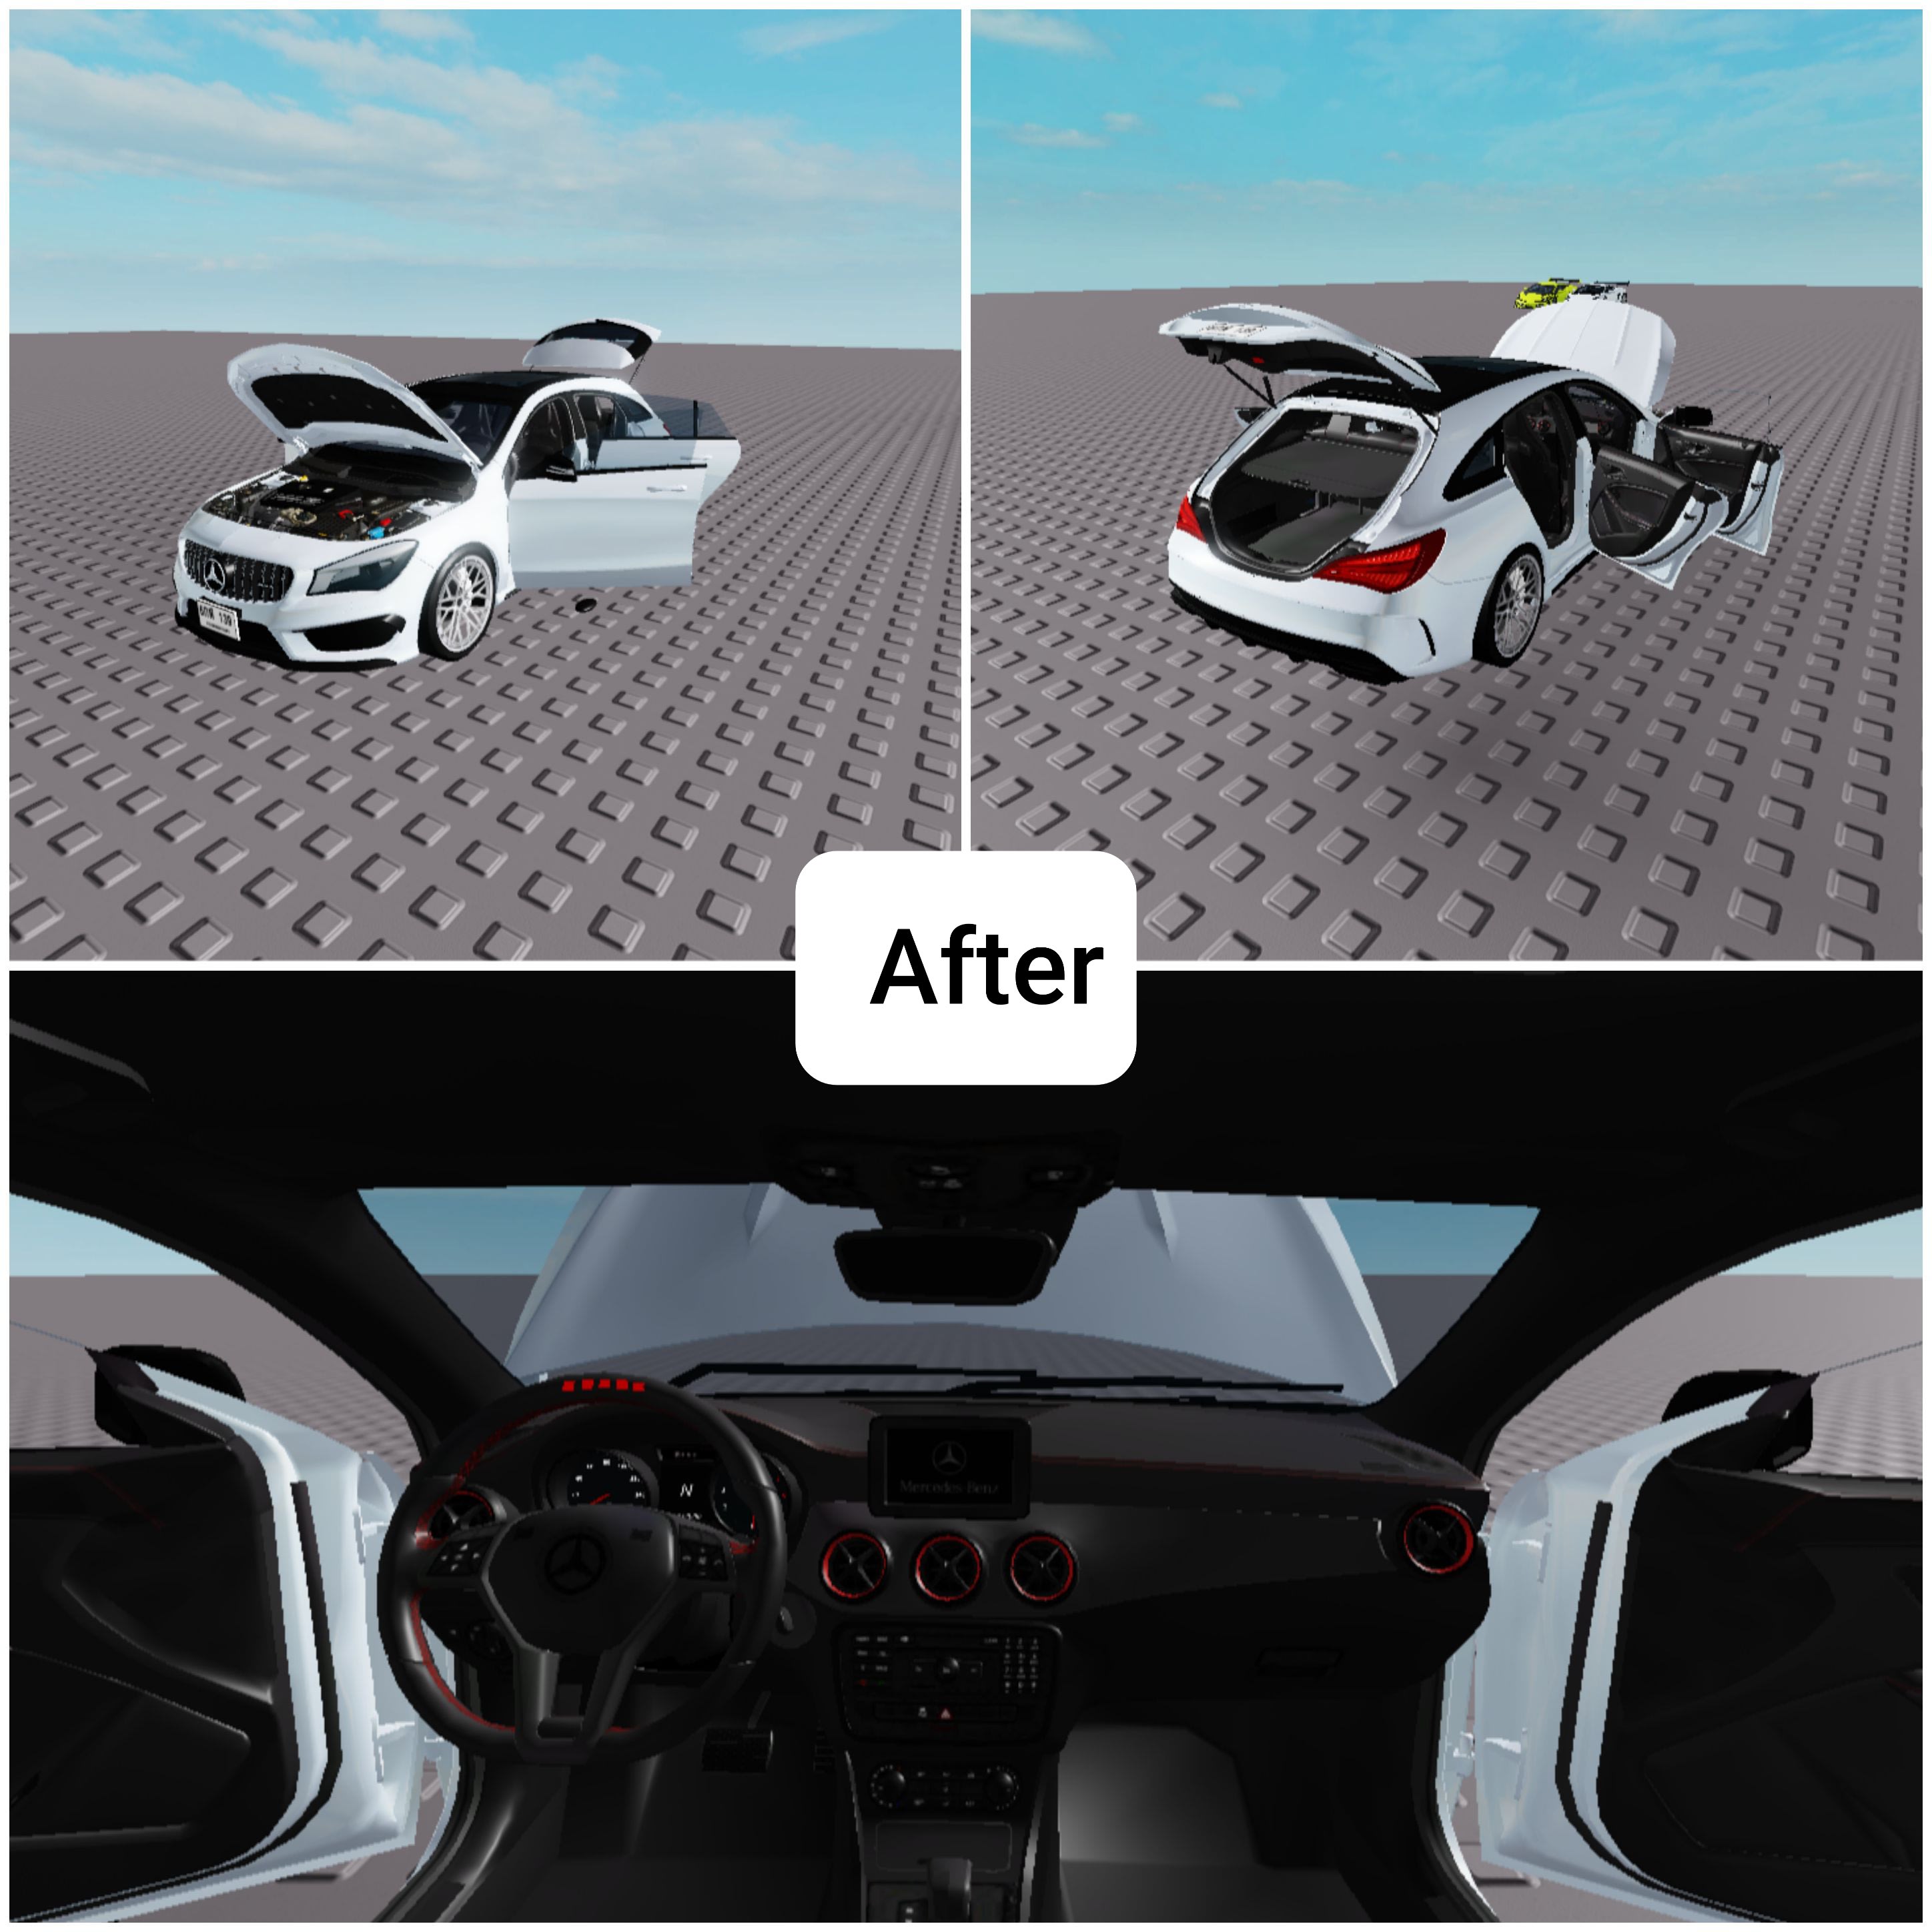 Modify Your Car Model In Roblox Studio With The Specifications You Desire By Sebastian Yeong - roblox car model